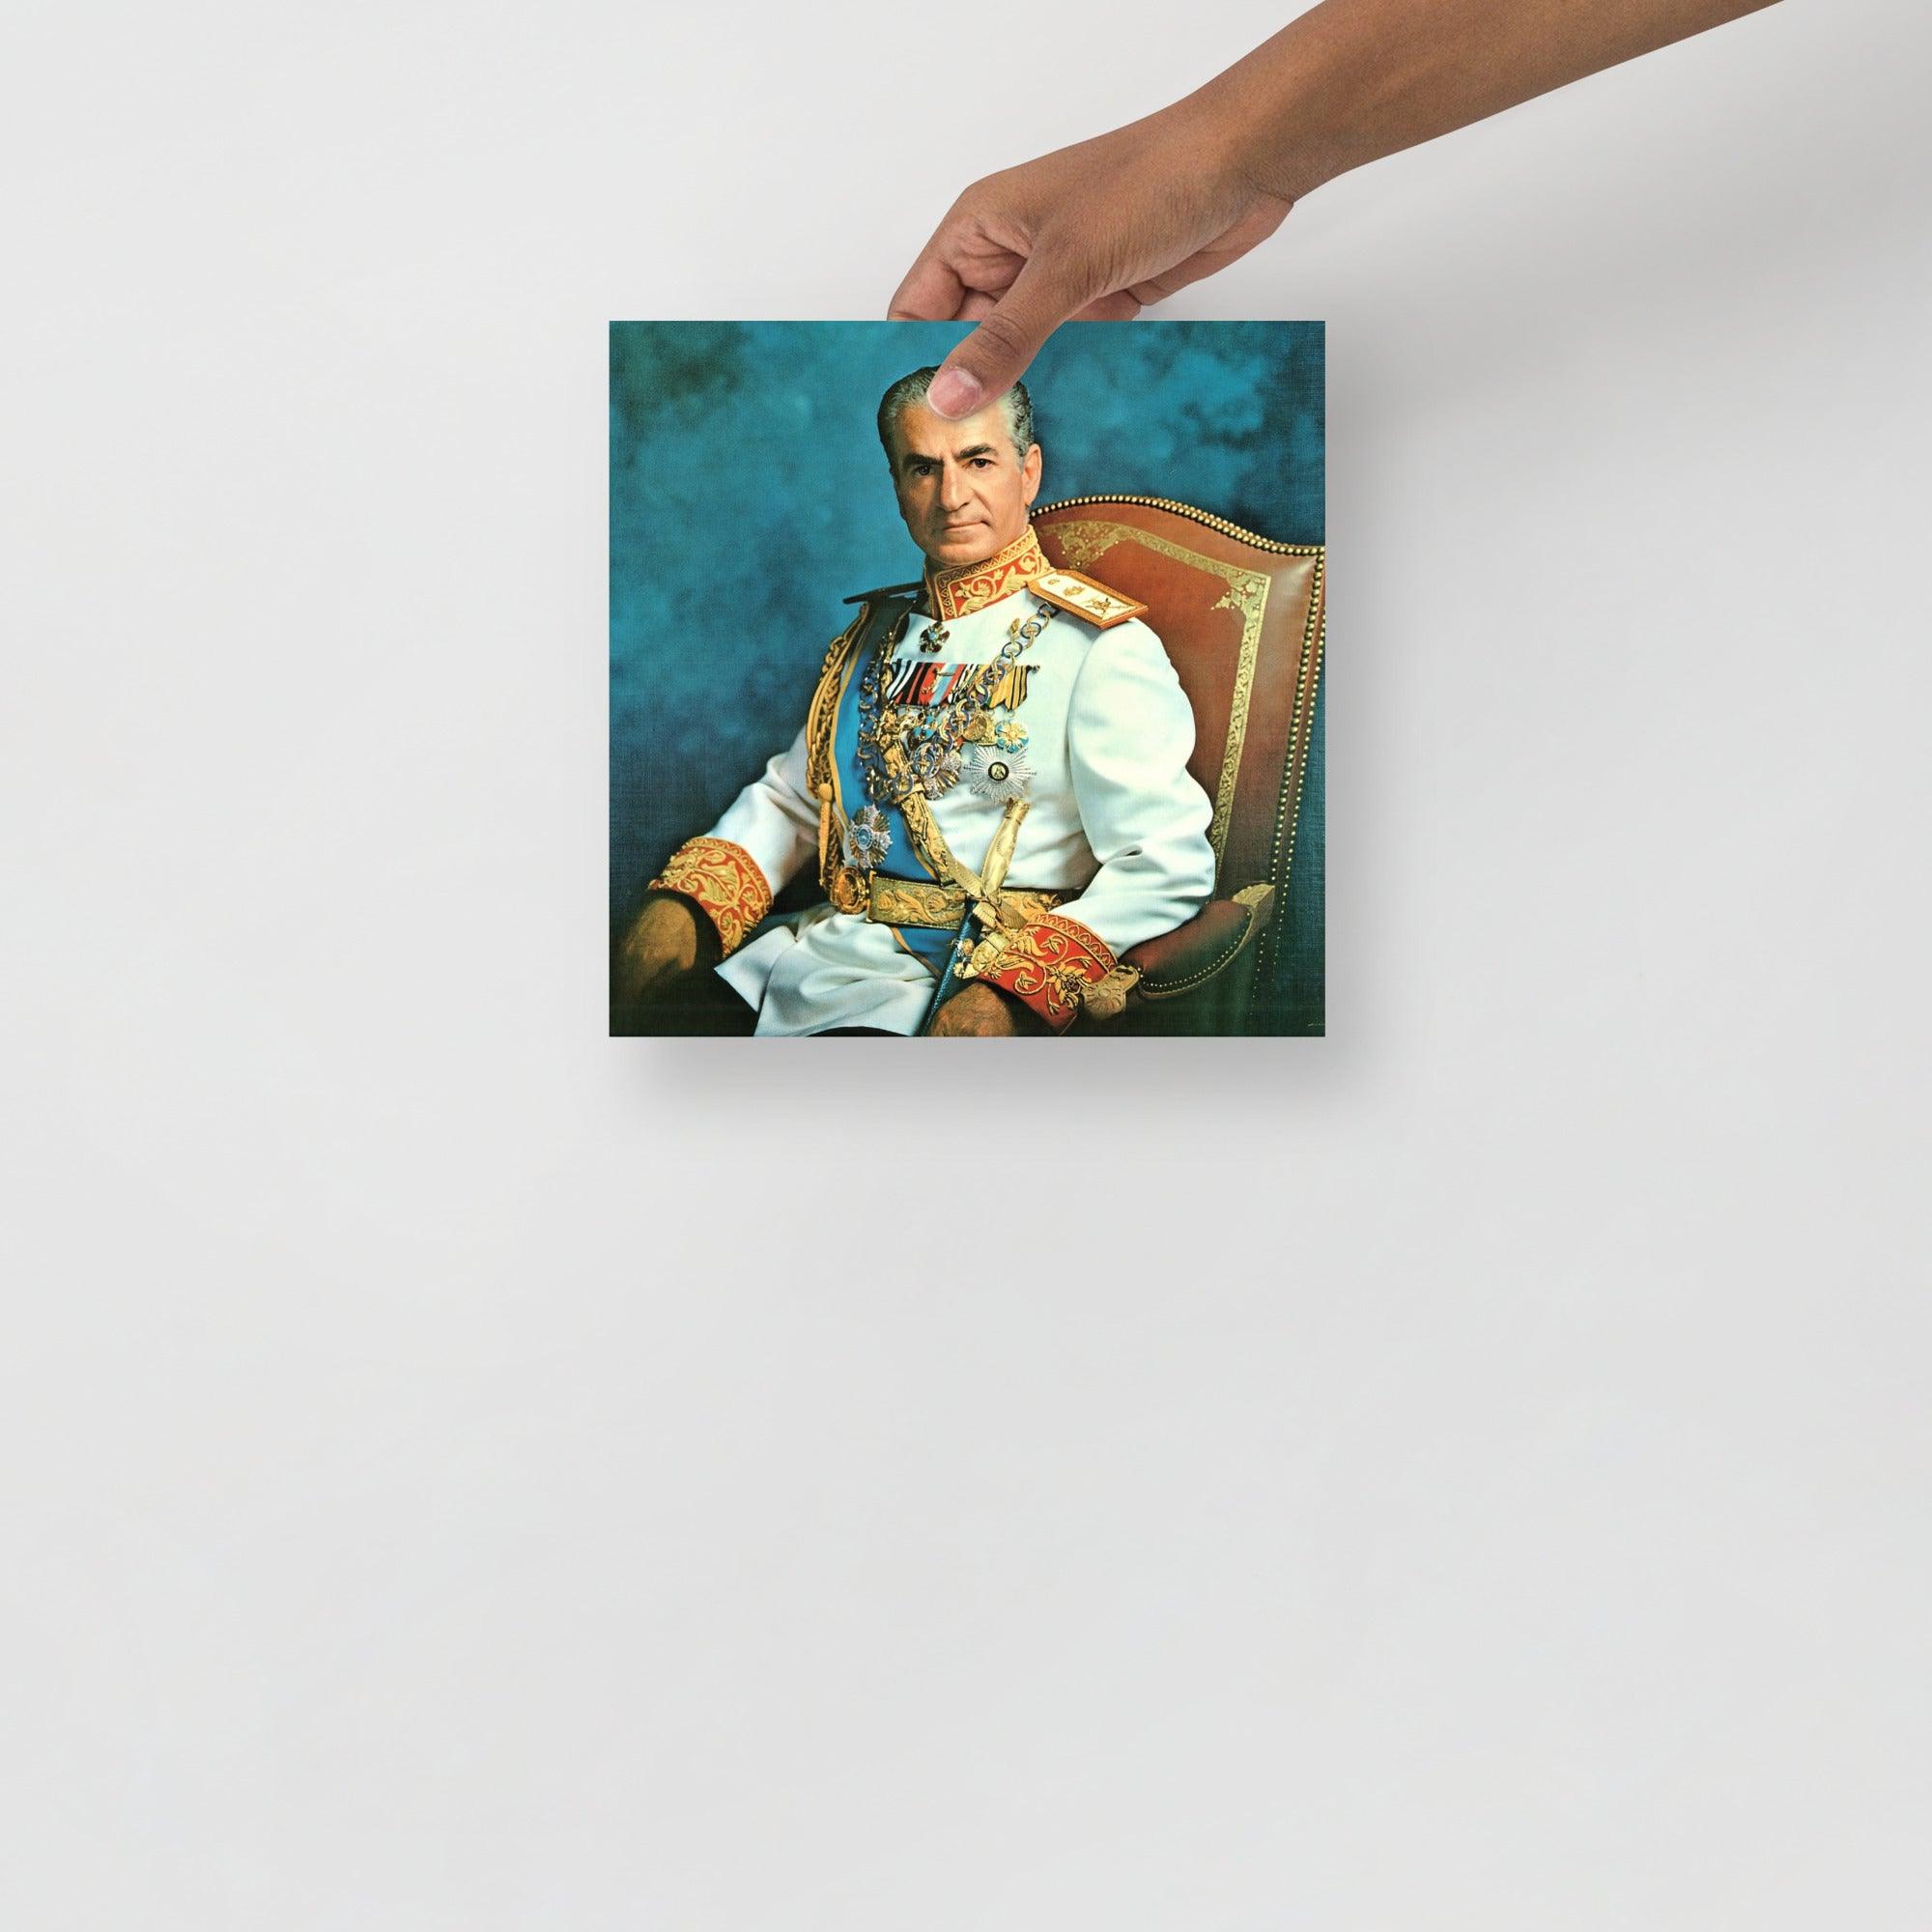 A Mohammad Reza Pahlavi poster on a plain backdrop in size 10x10”.